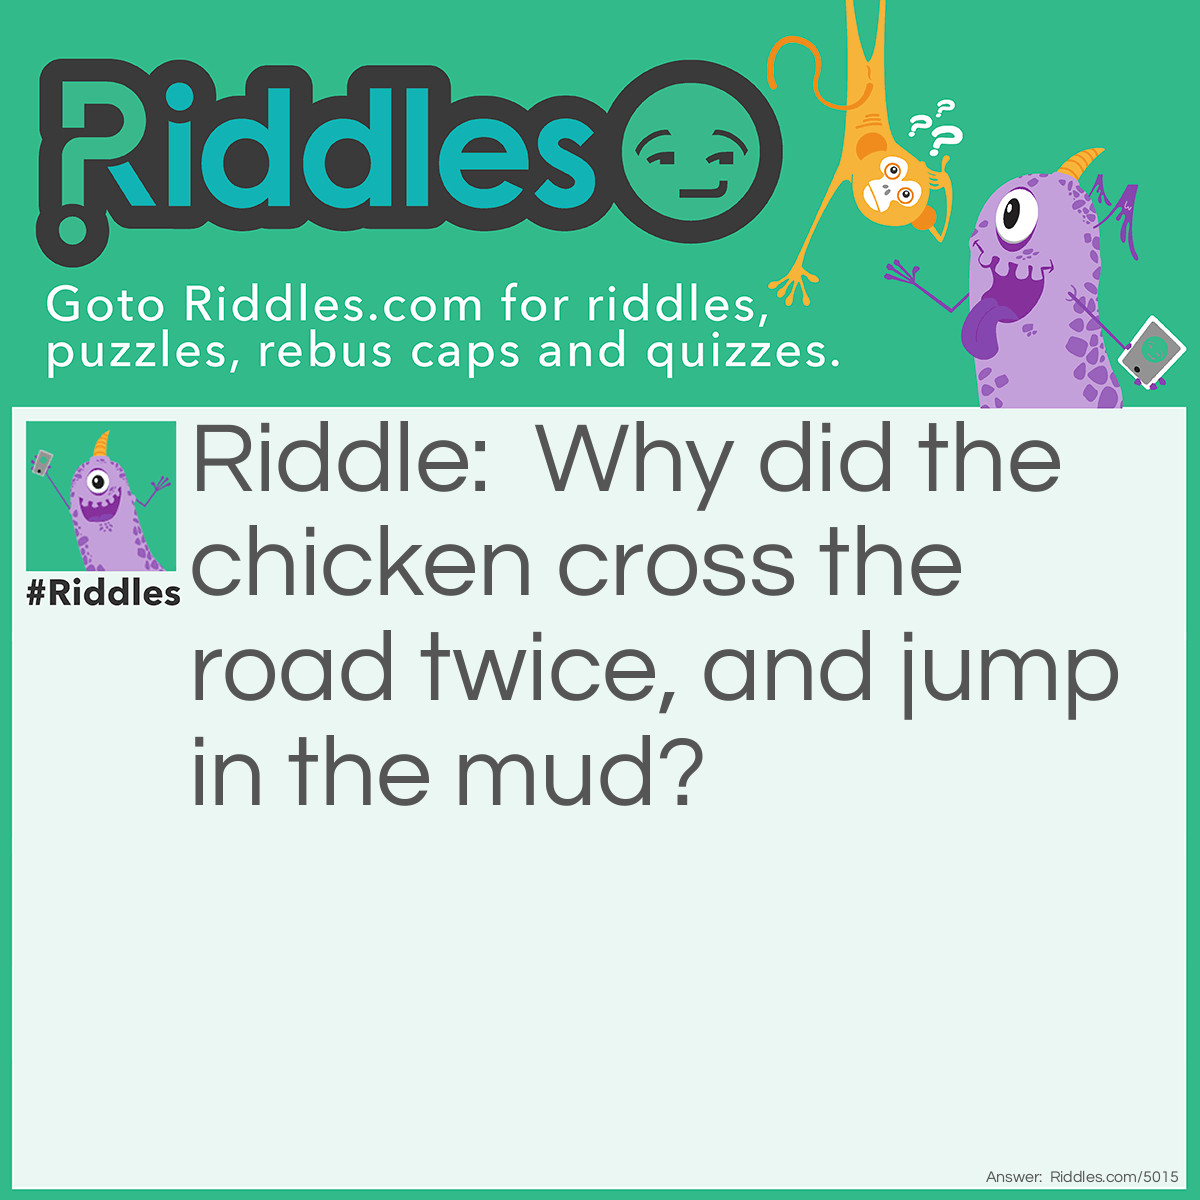 Riddle: Why did the chicken cross the road twice, and jump in mud? Answer: He was a dirty double-crosser.